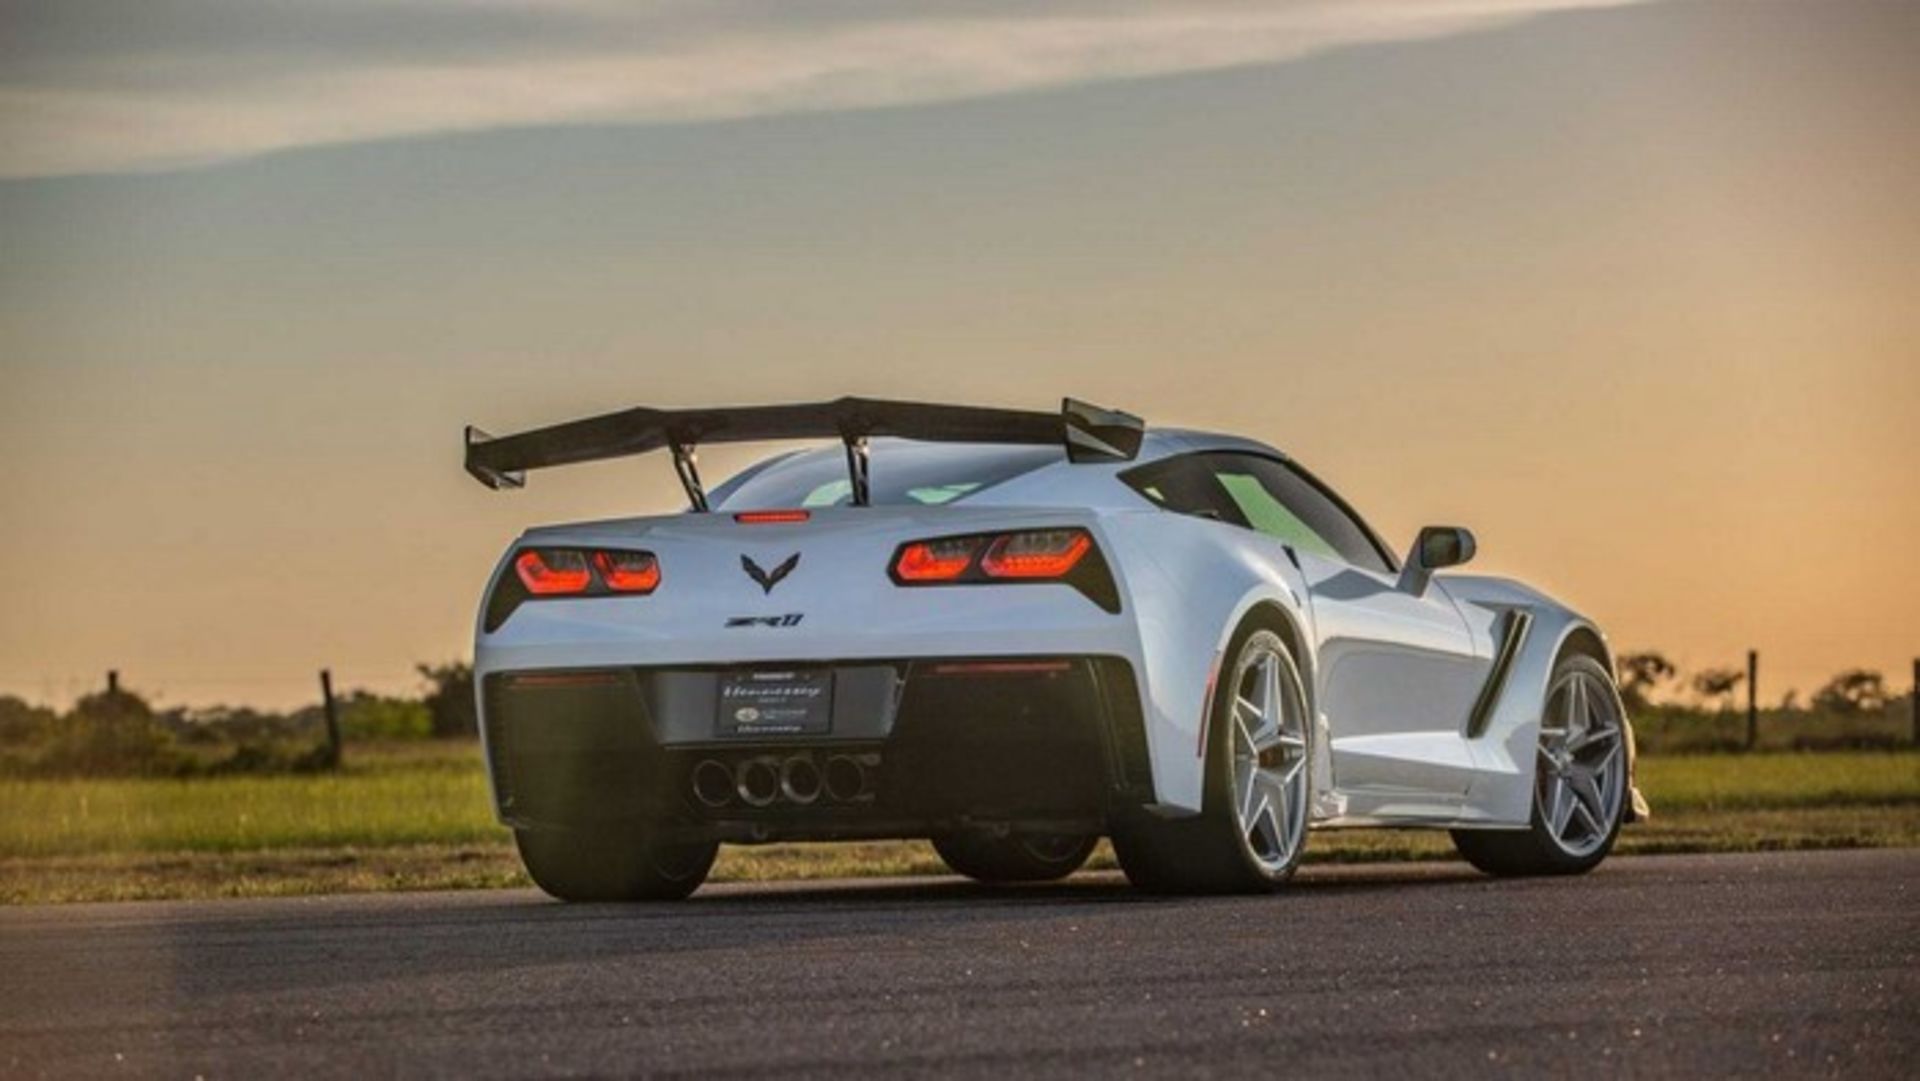 2019 Chevy Corvette ZR1 HPE1200 by Hennessey